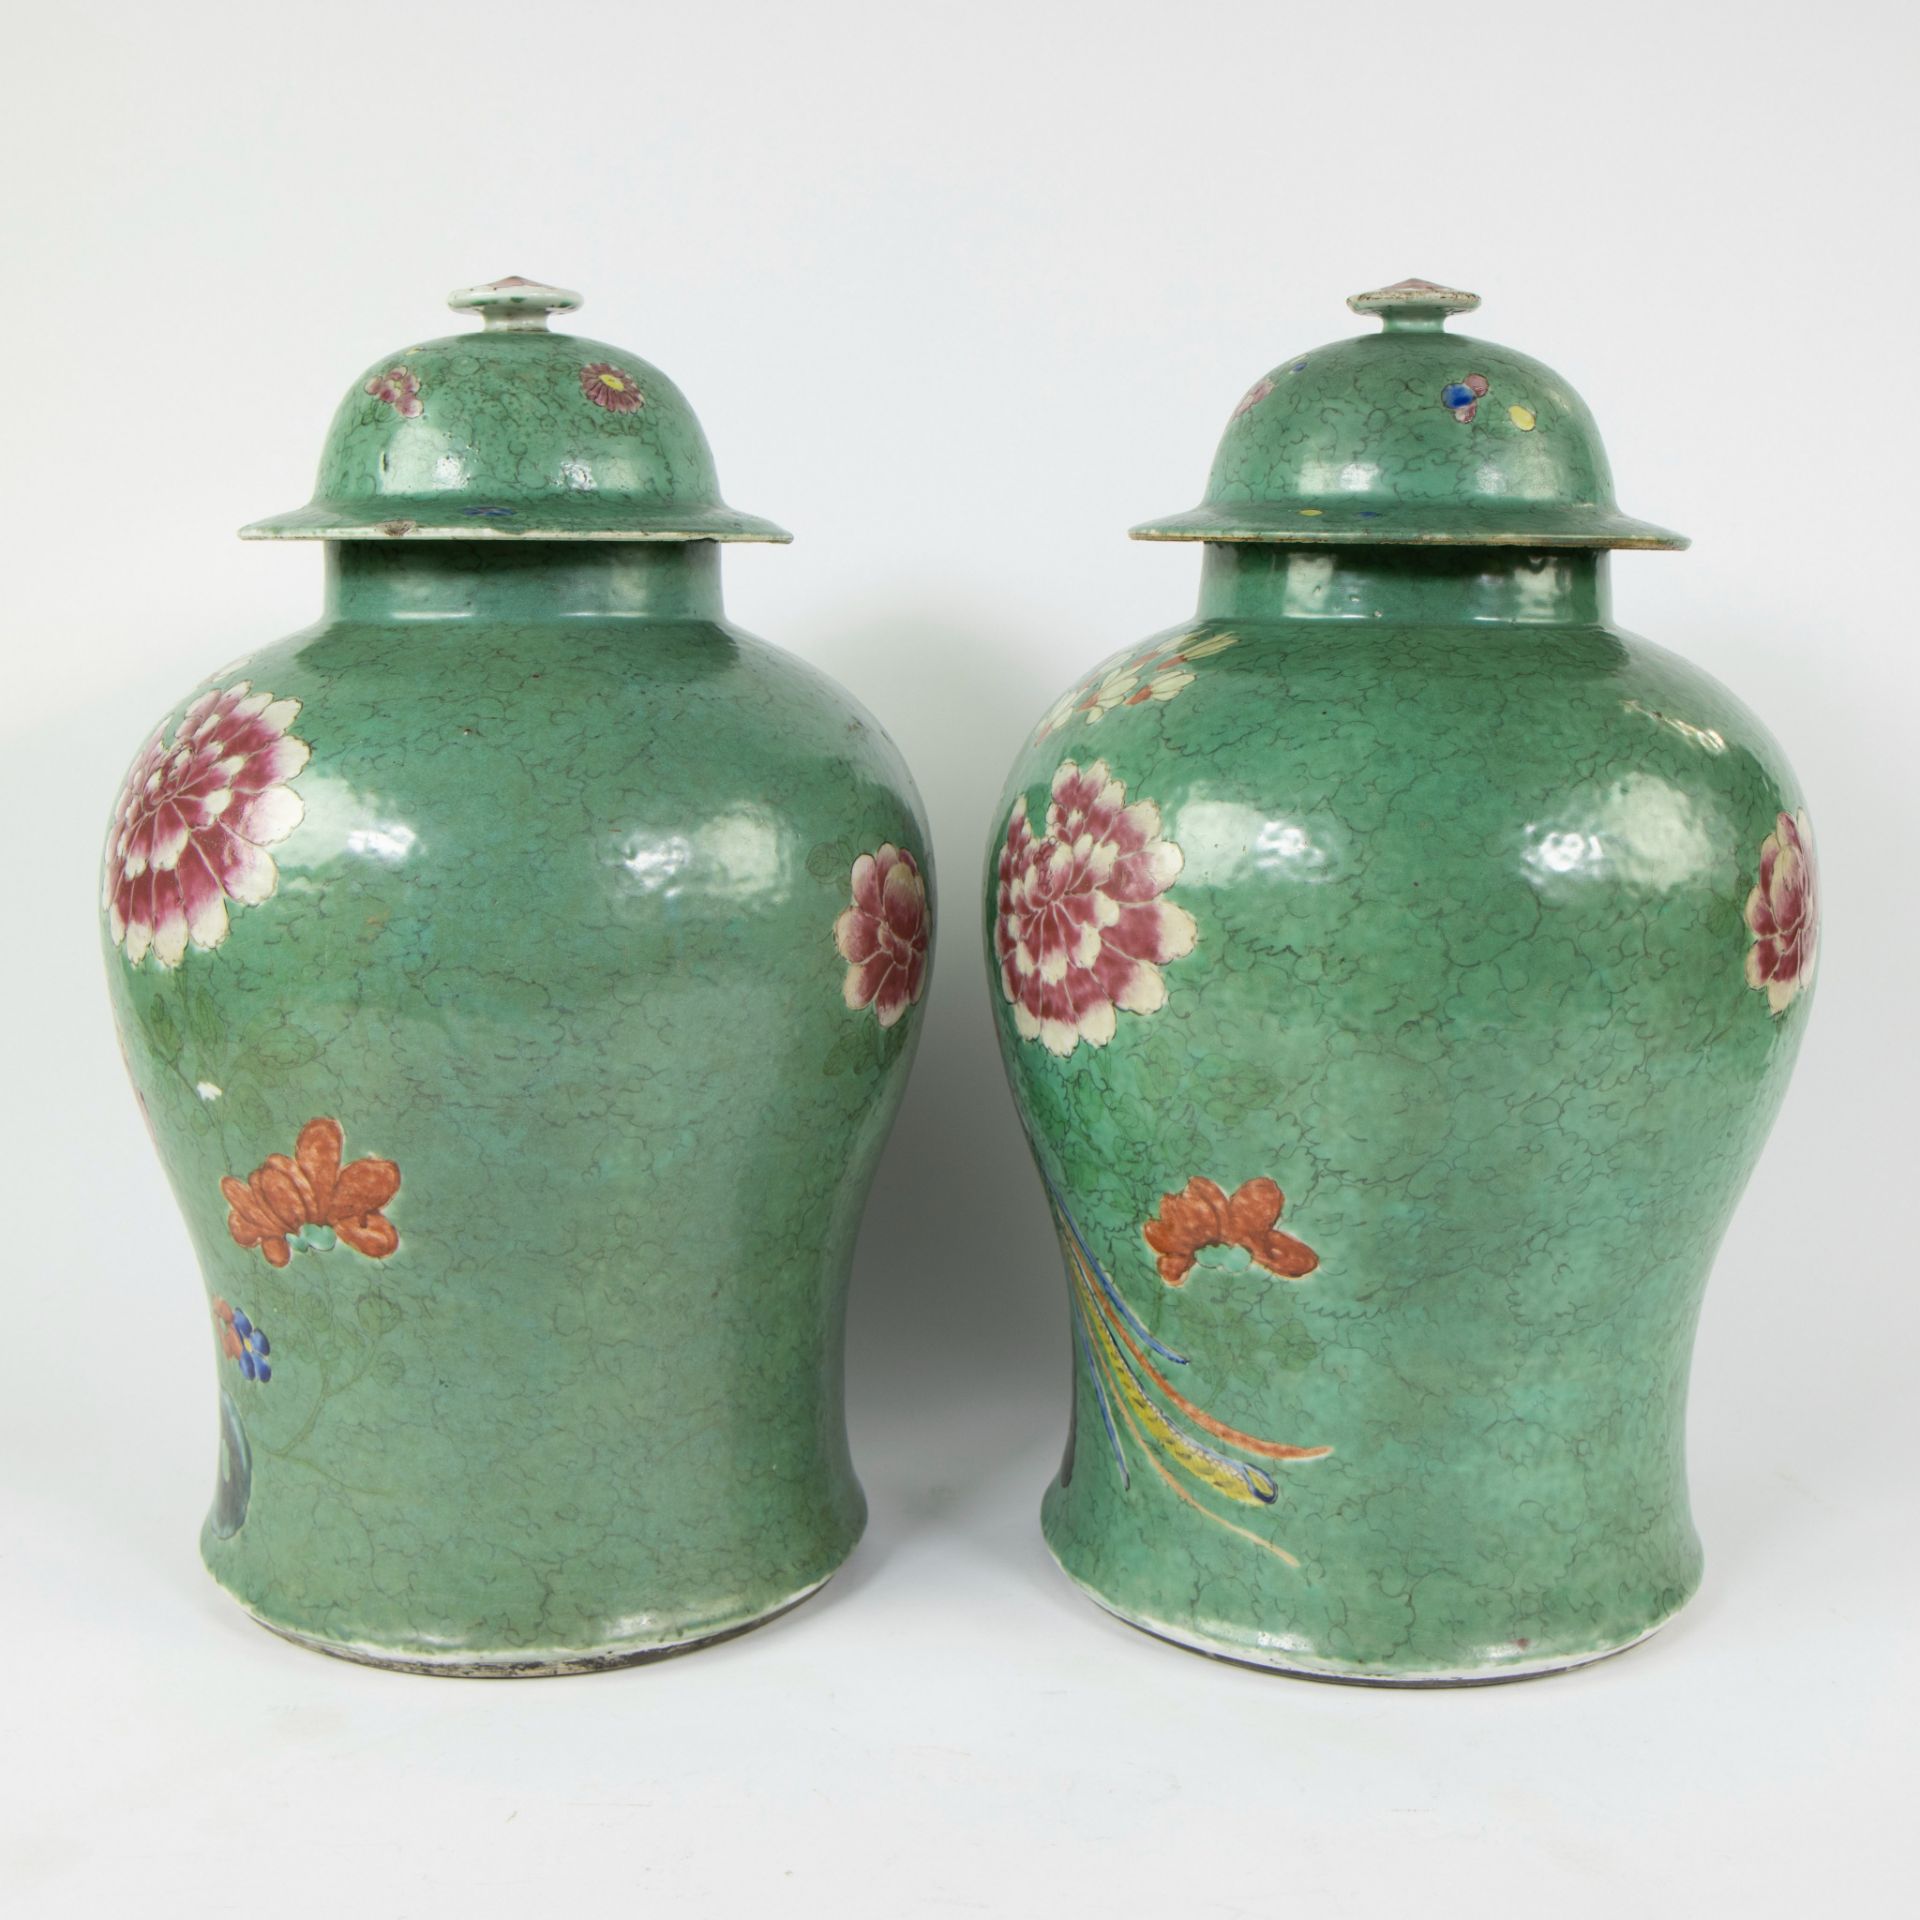 Pair of Chinese baluster shaped jars and their covers symmetrically decorated in fencai enamels depi - Image 4 of 12